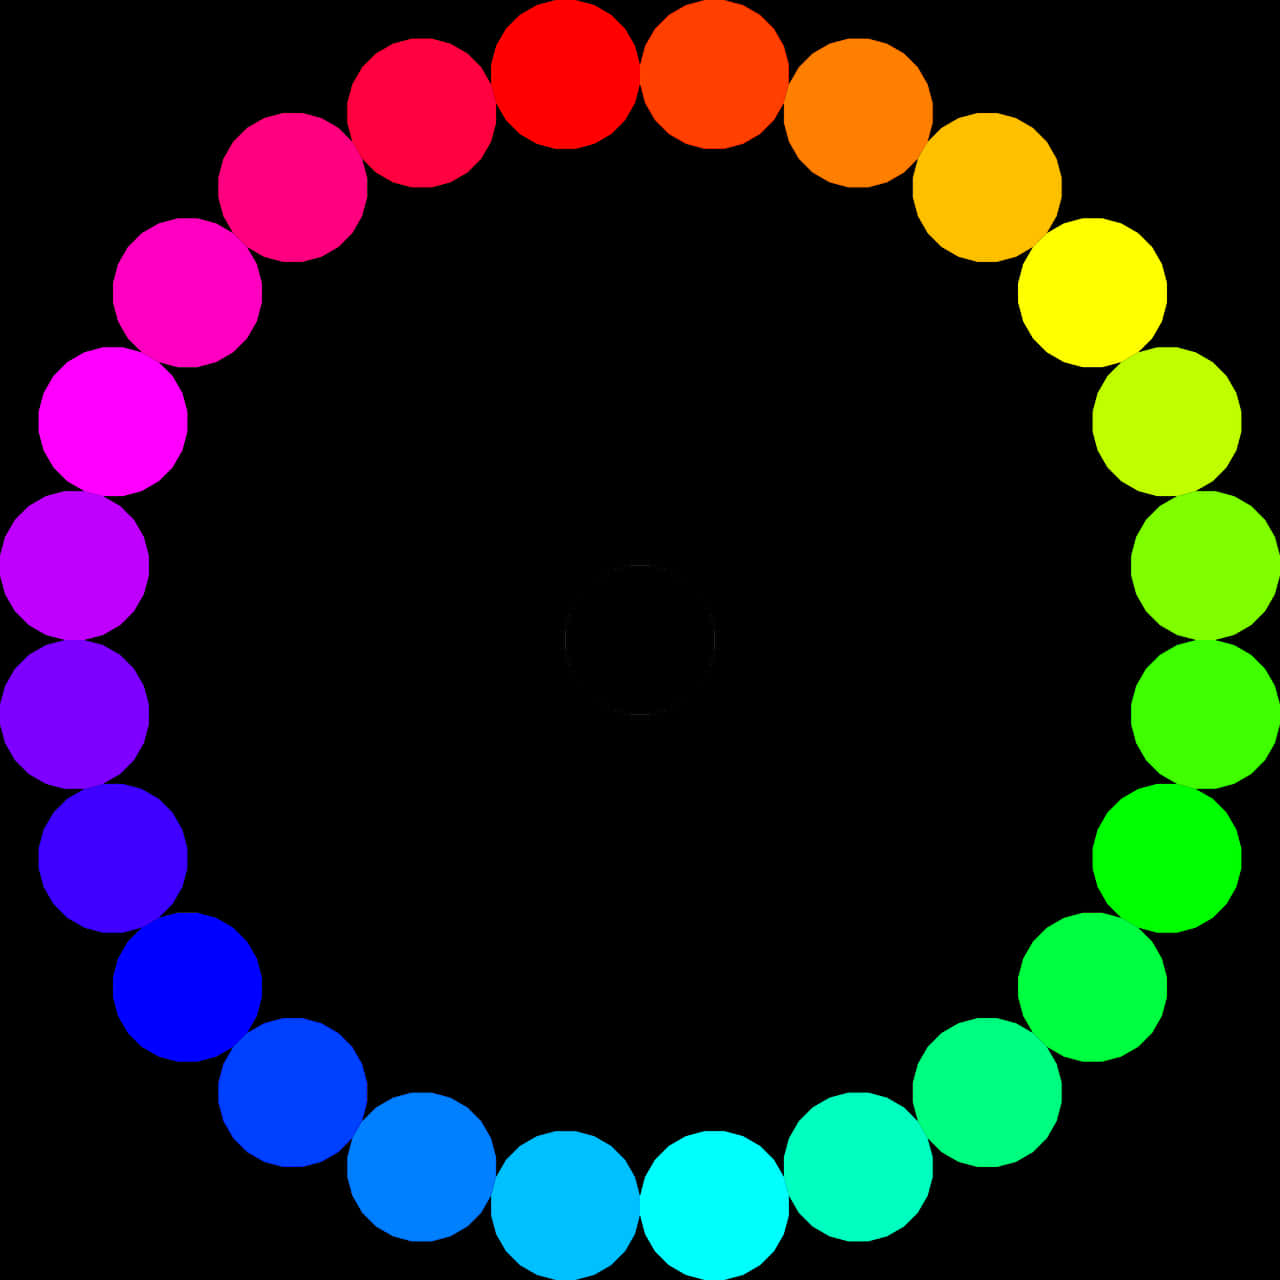 A Rainbow Colored Circles In A Circle